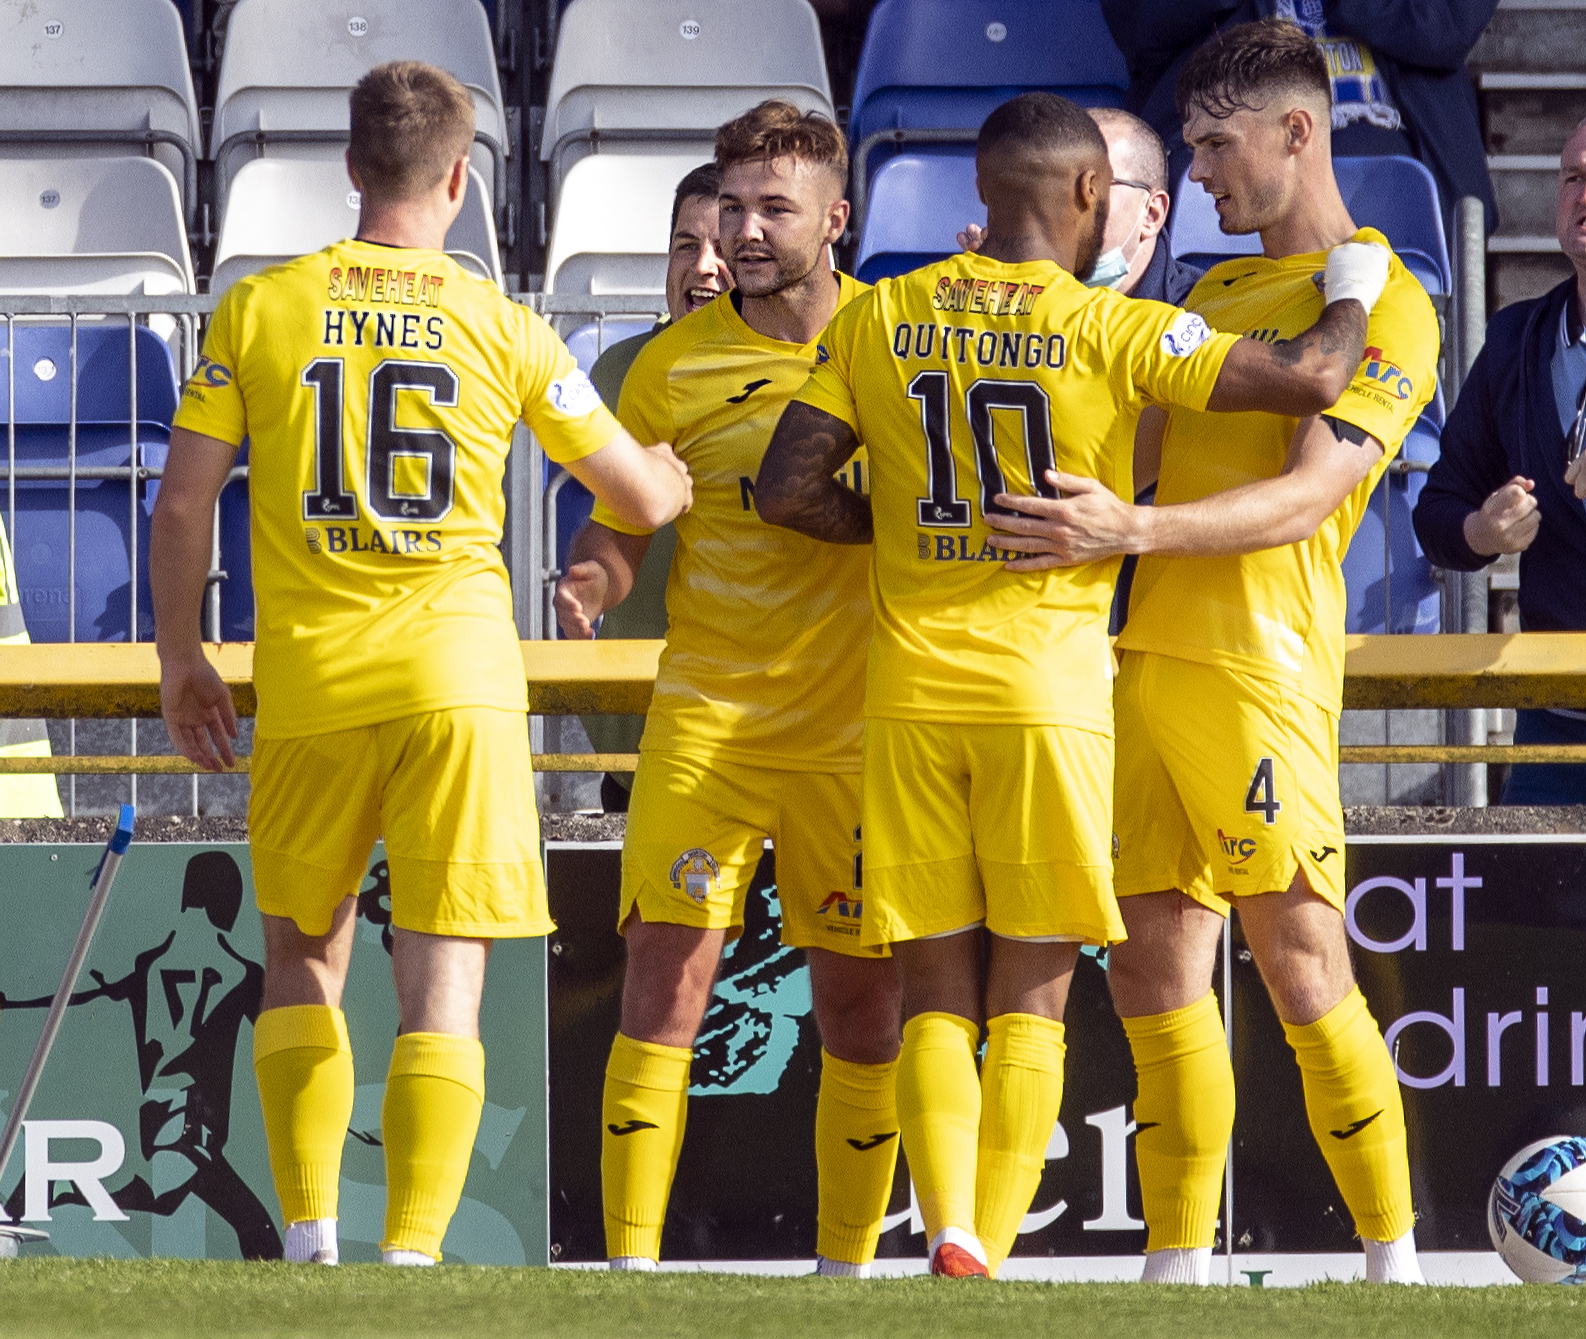 Morton face leaders Ayr in SPFL Championship game of day